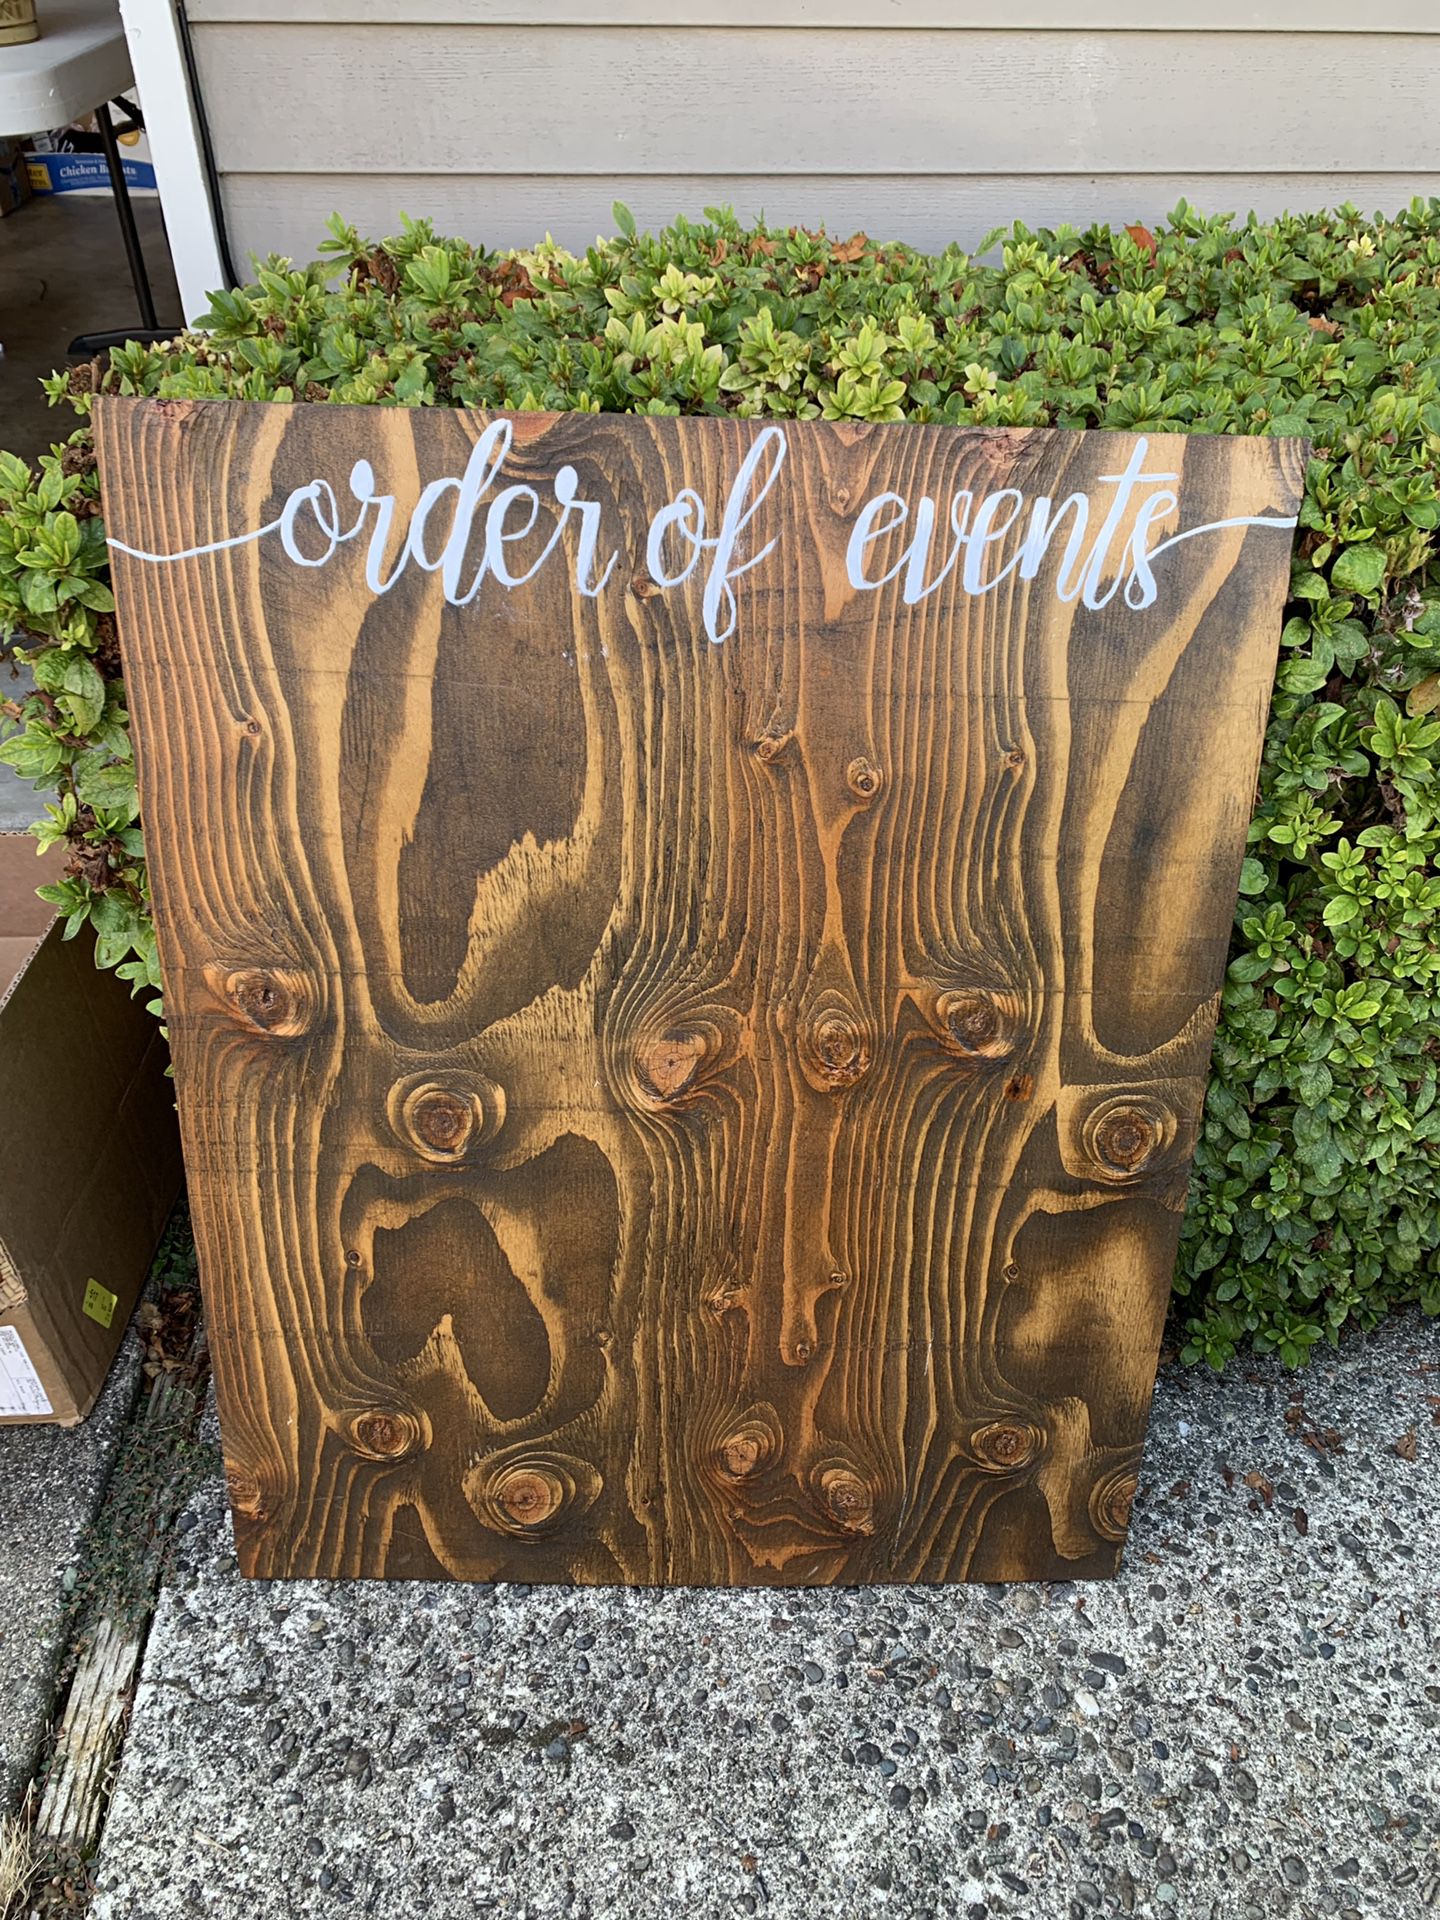 Order of events wood sign